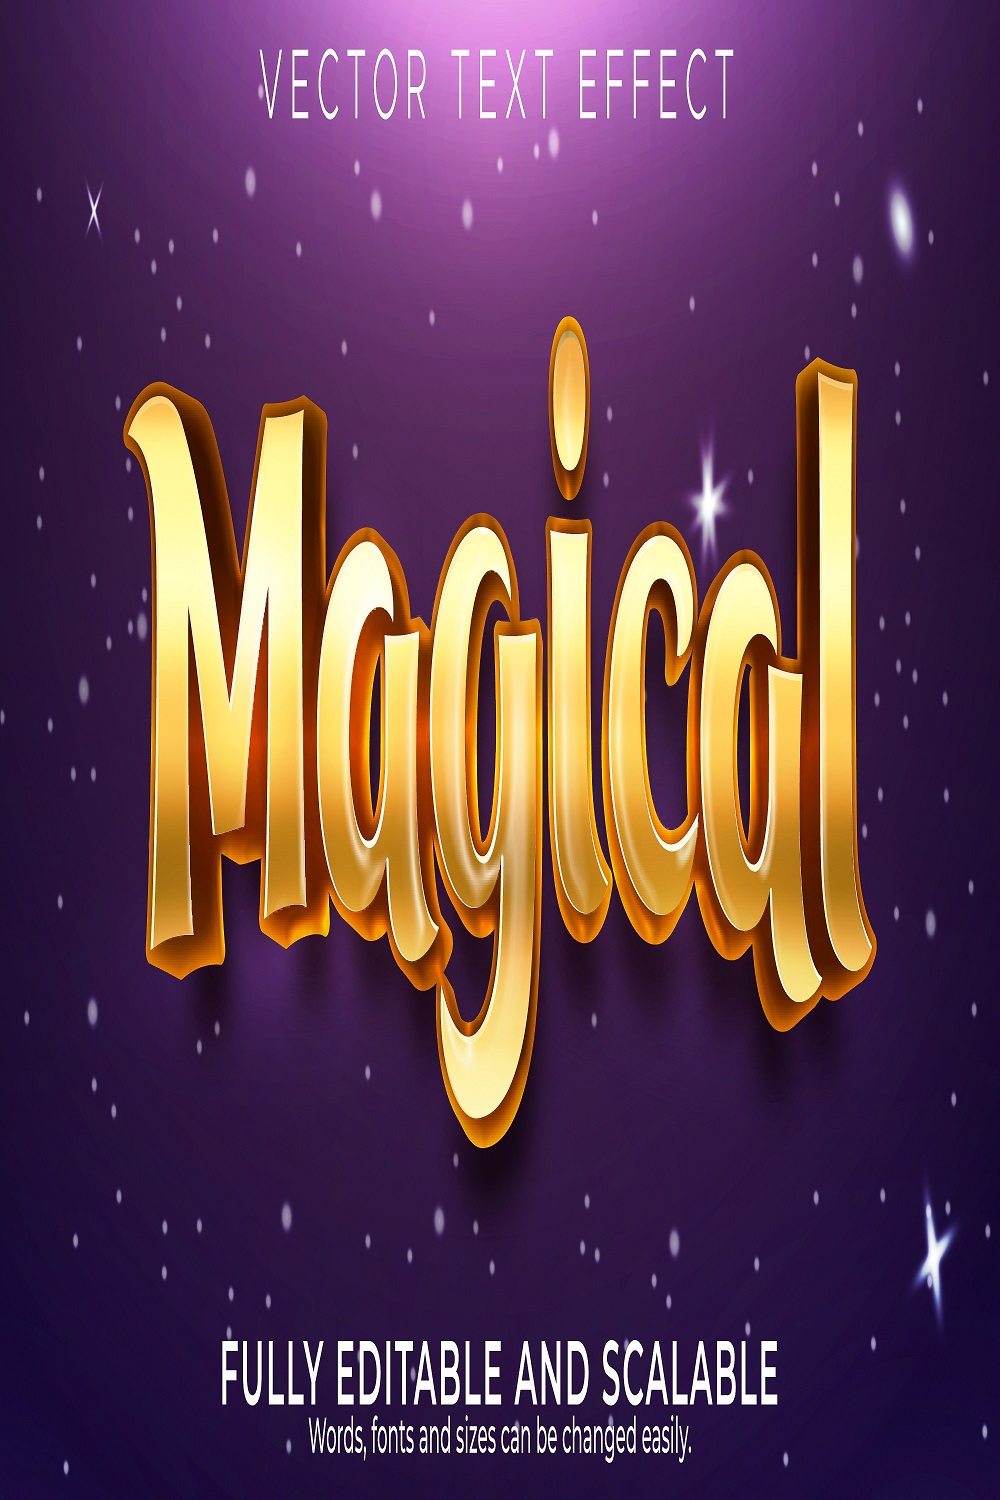 Magical golden text effect editable fairy tale text style pinterest preview image.